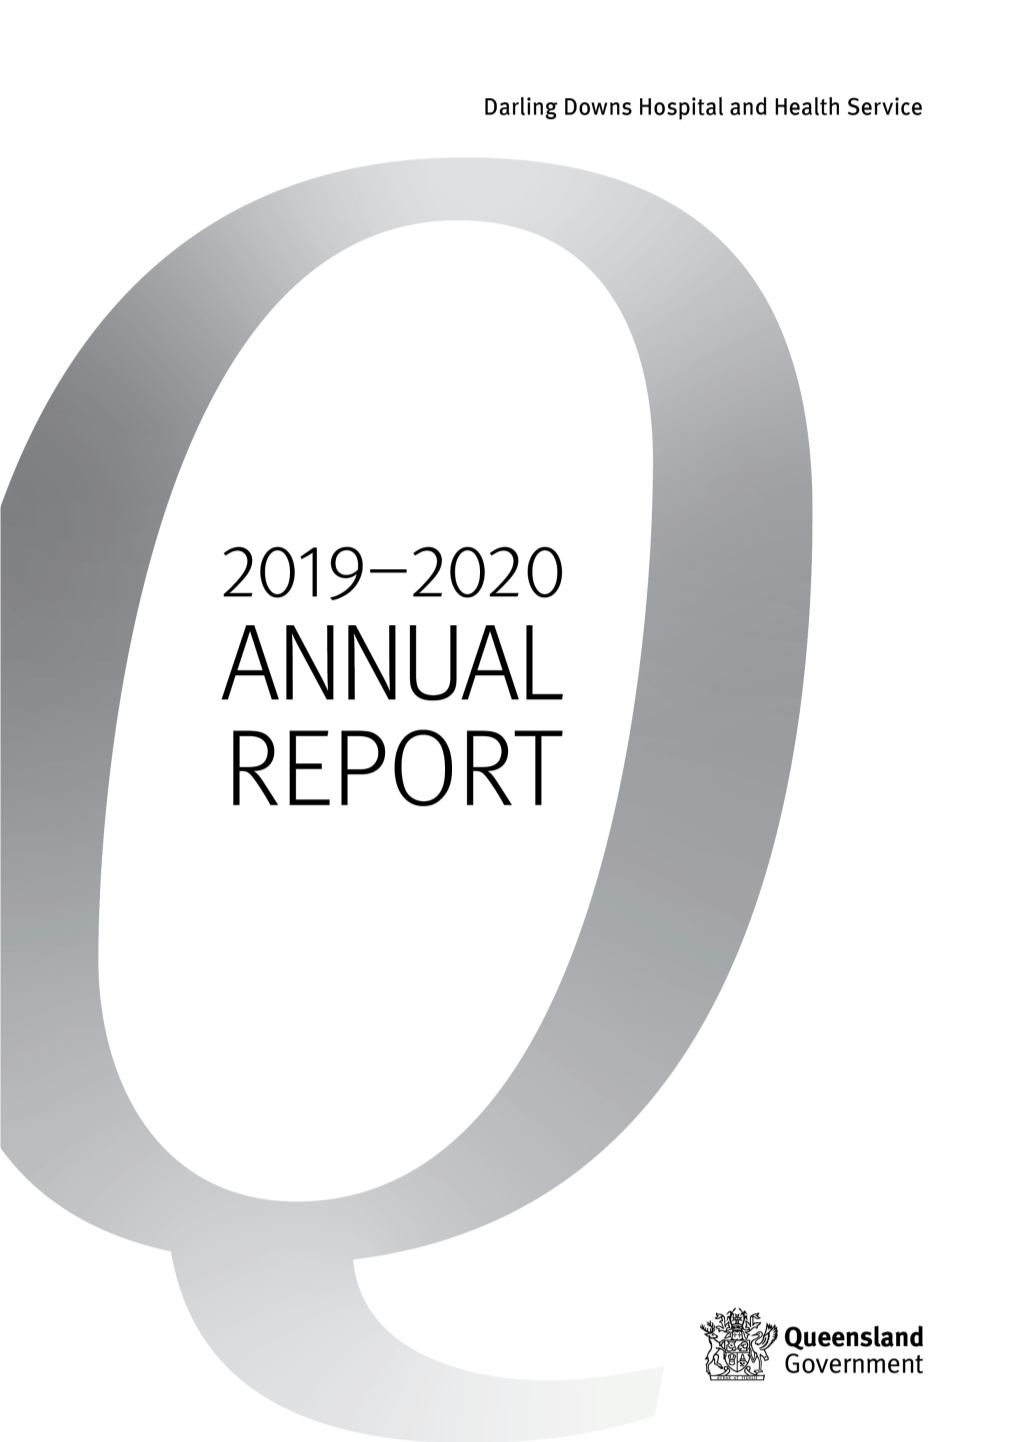 Darling Downs Hospital and Health Service Annual Report 2019-2020